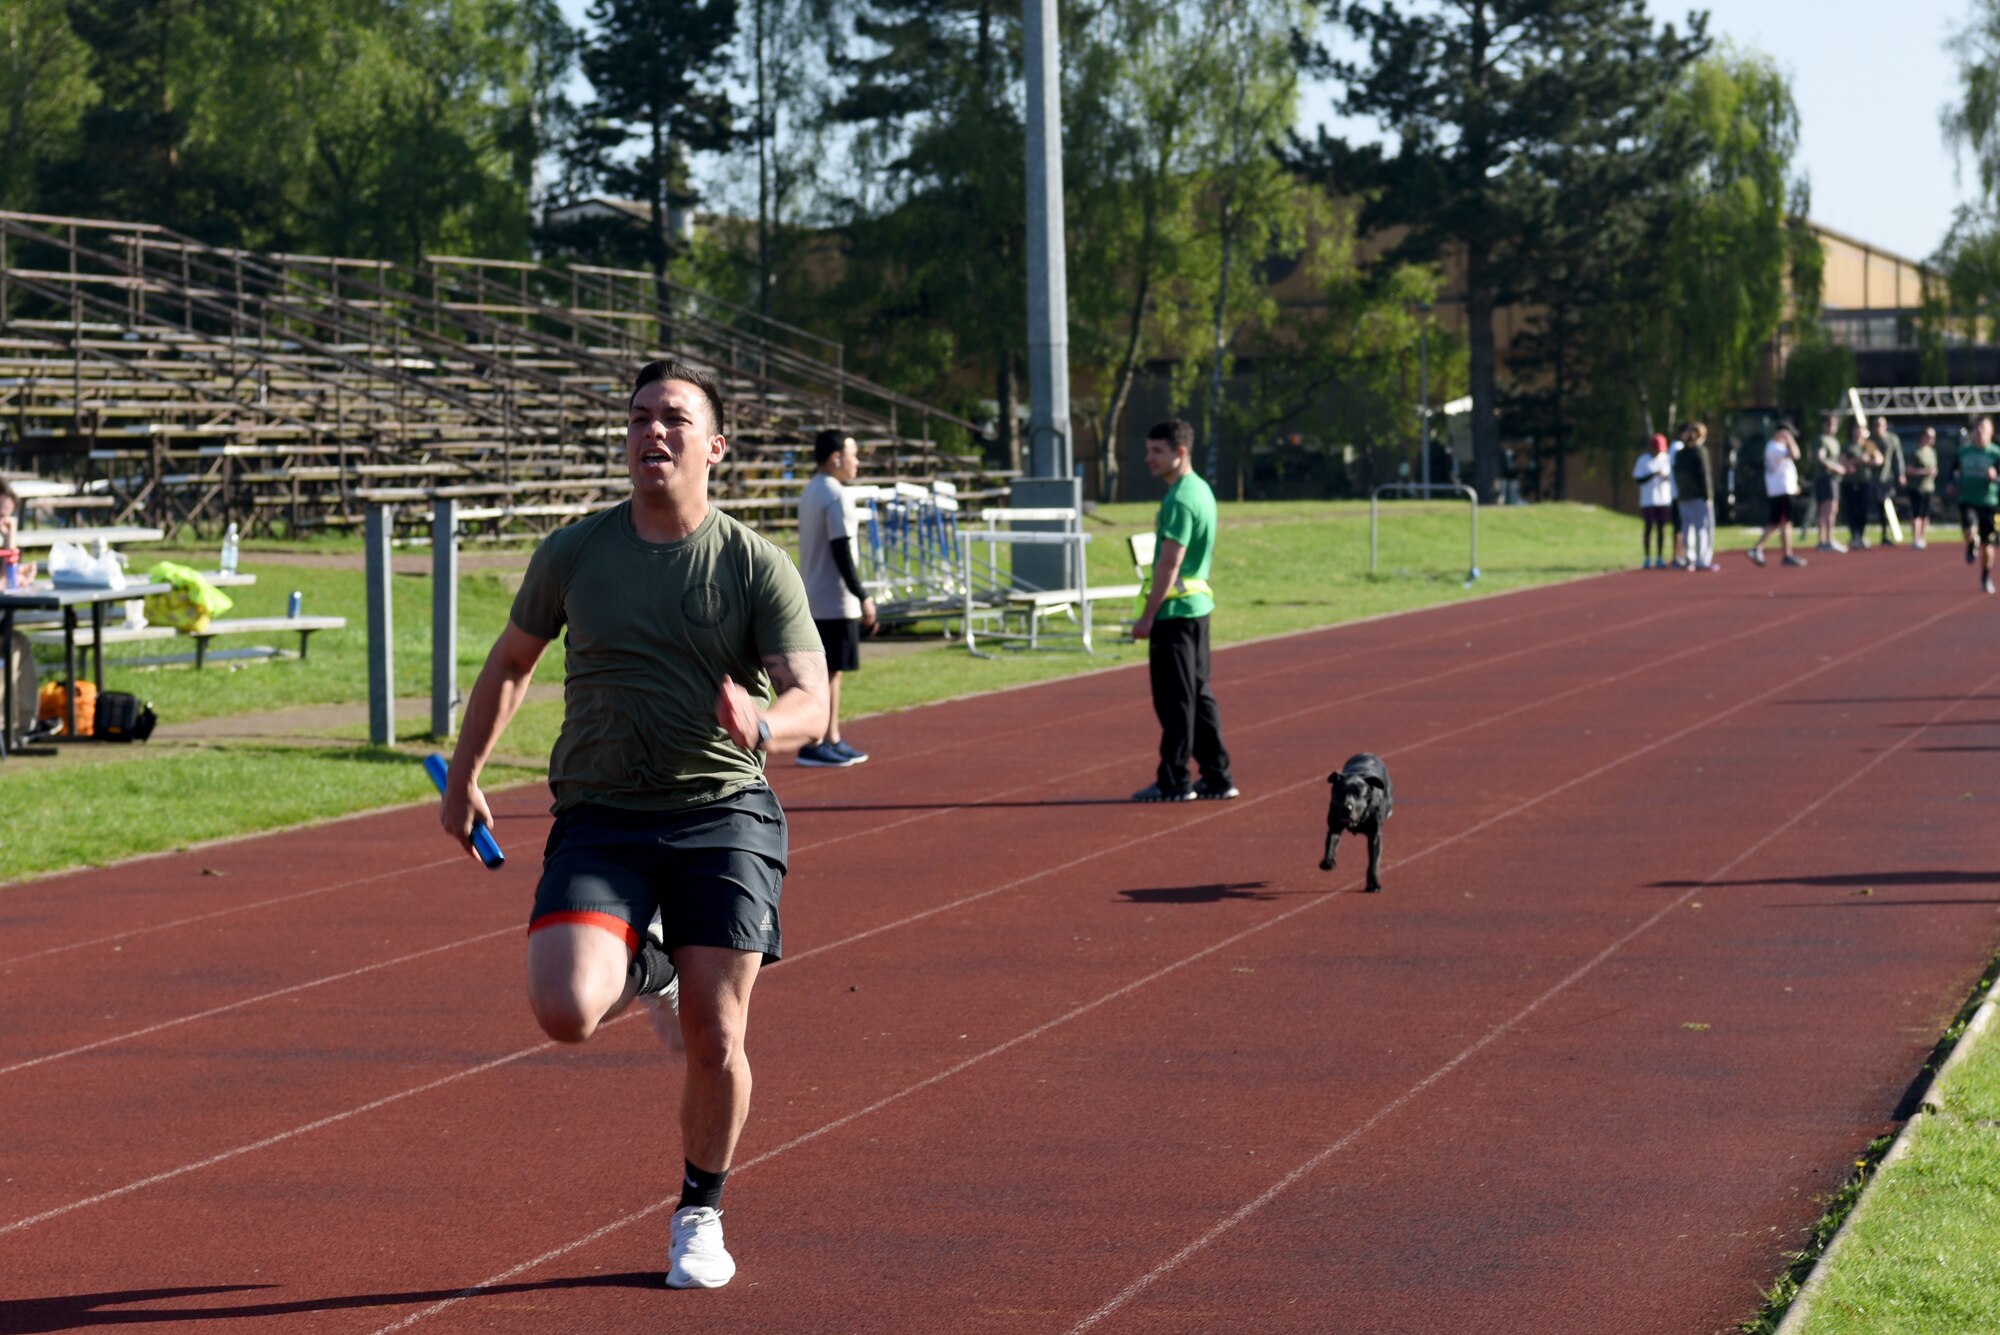 An Airman from the 48th Civil Engineer Squadron participates in a relay run as part of the 48th Force Support Squadron's "You Got Served" events at Royal Air Force Lakenheath, England, May 4, 2018. During the relay run participating squadrons recieved raffle tickets for cash prizes between $10 and $1,000. (U.S. Air Force Photo/ Airman 1st Class John A. Crawford)